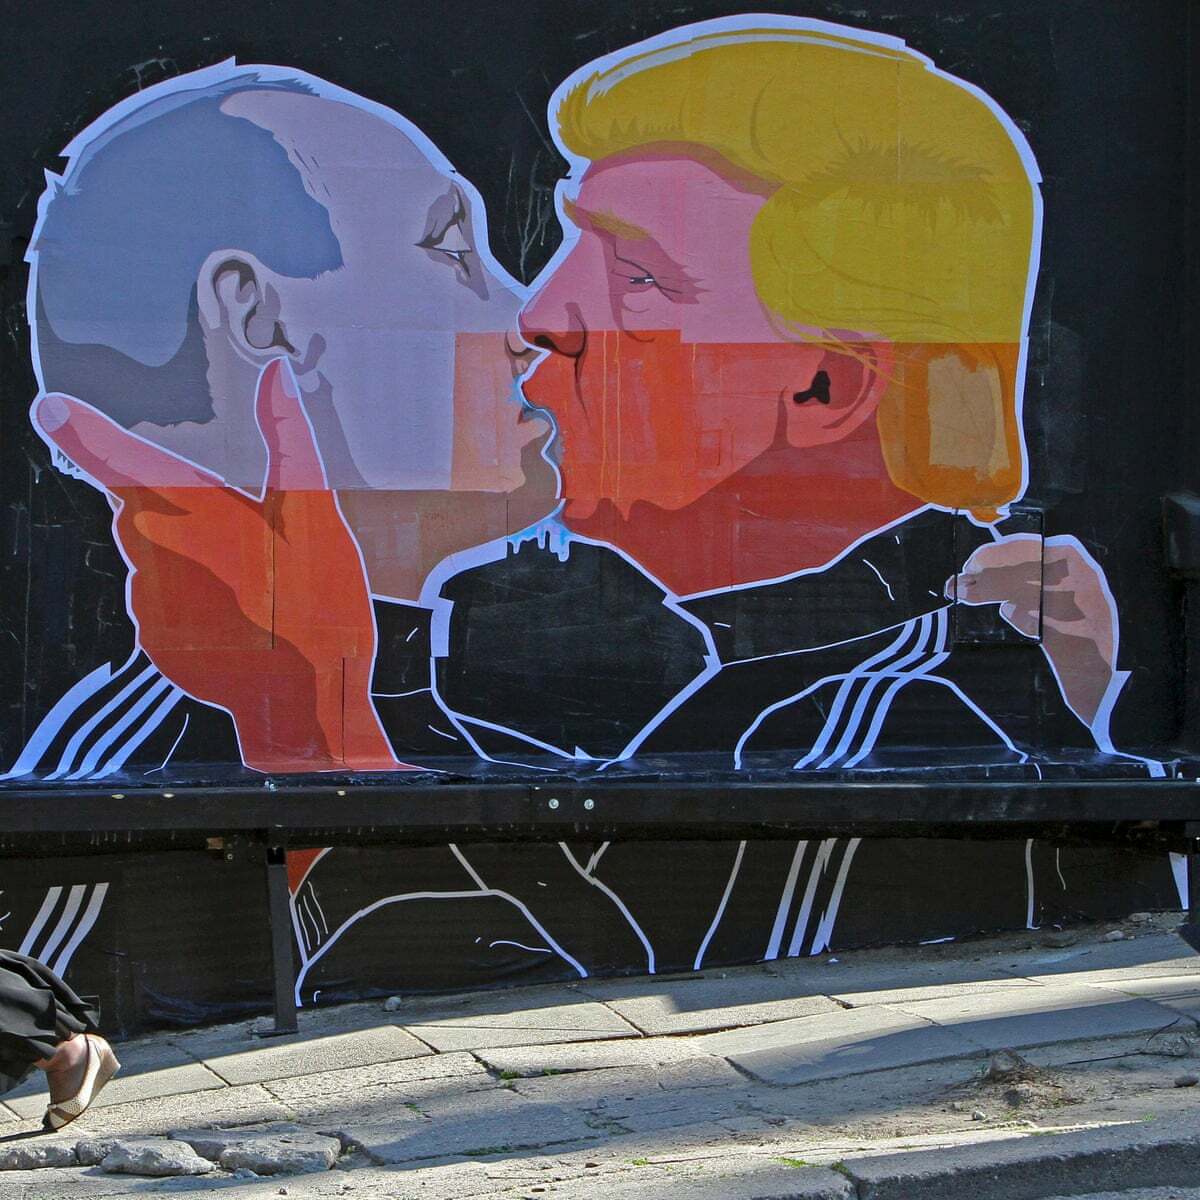 This Mural On The Side Of A Restaurant In Lithuania Depicts Donald Trump Kissing Vladimir Putin